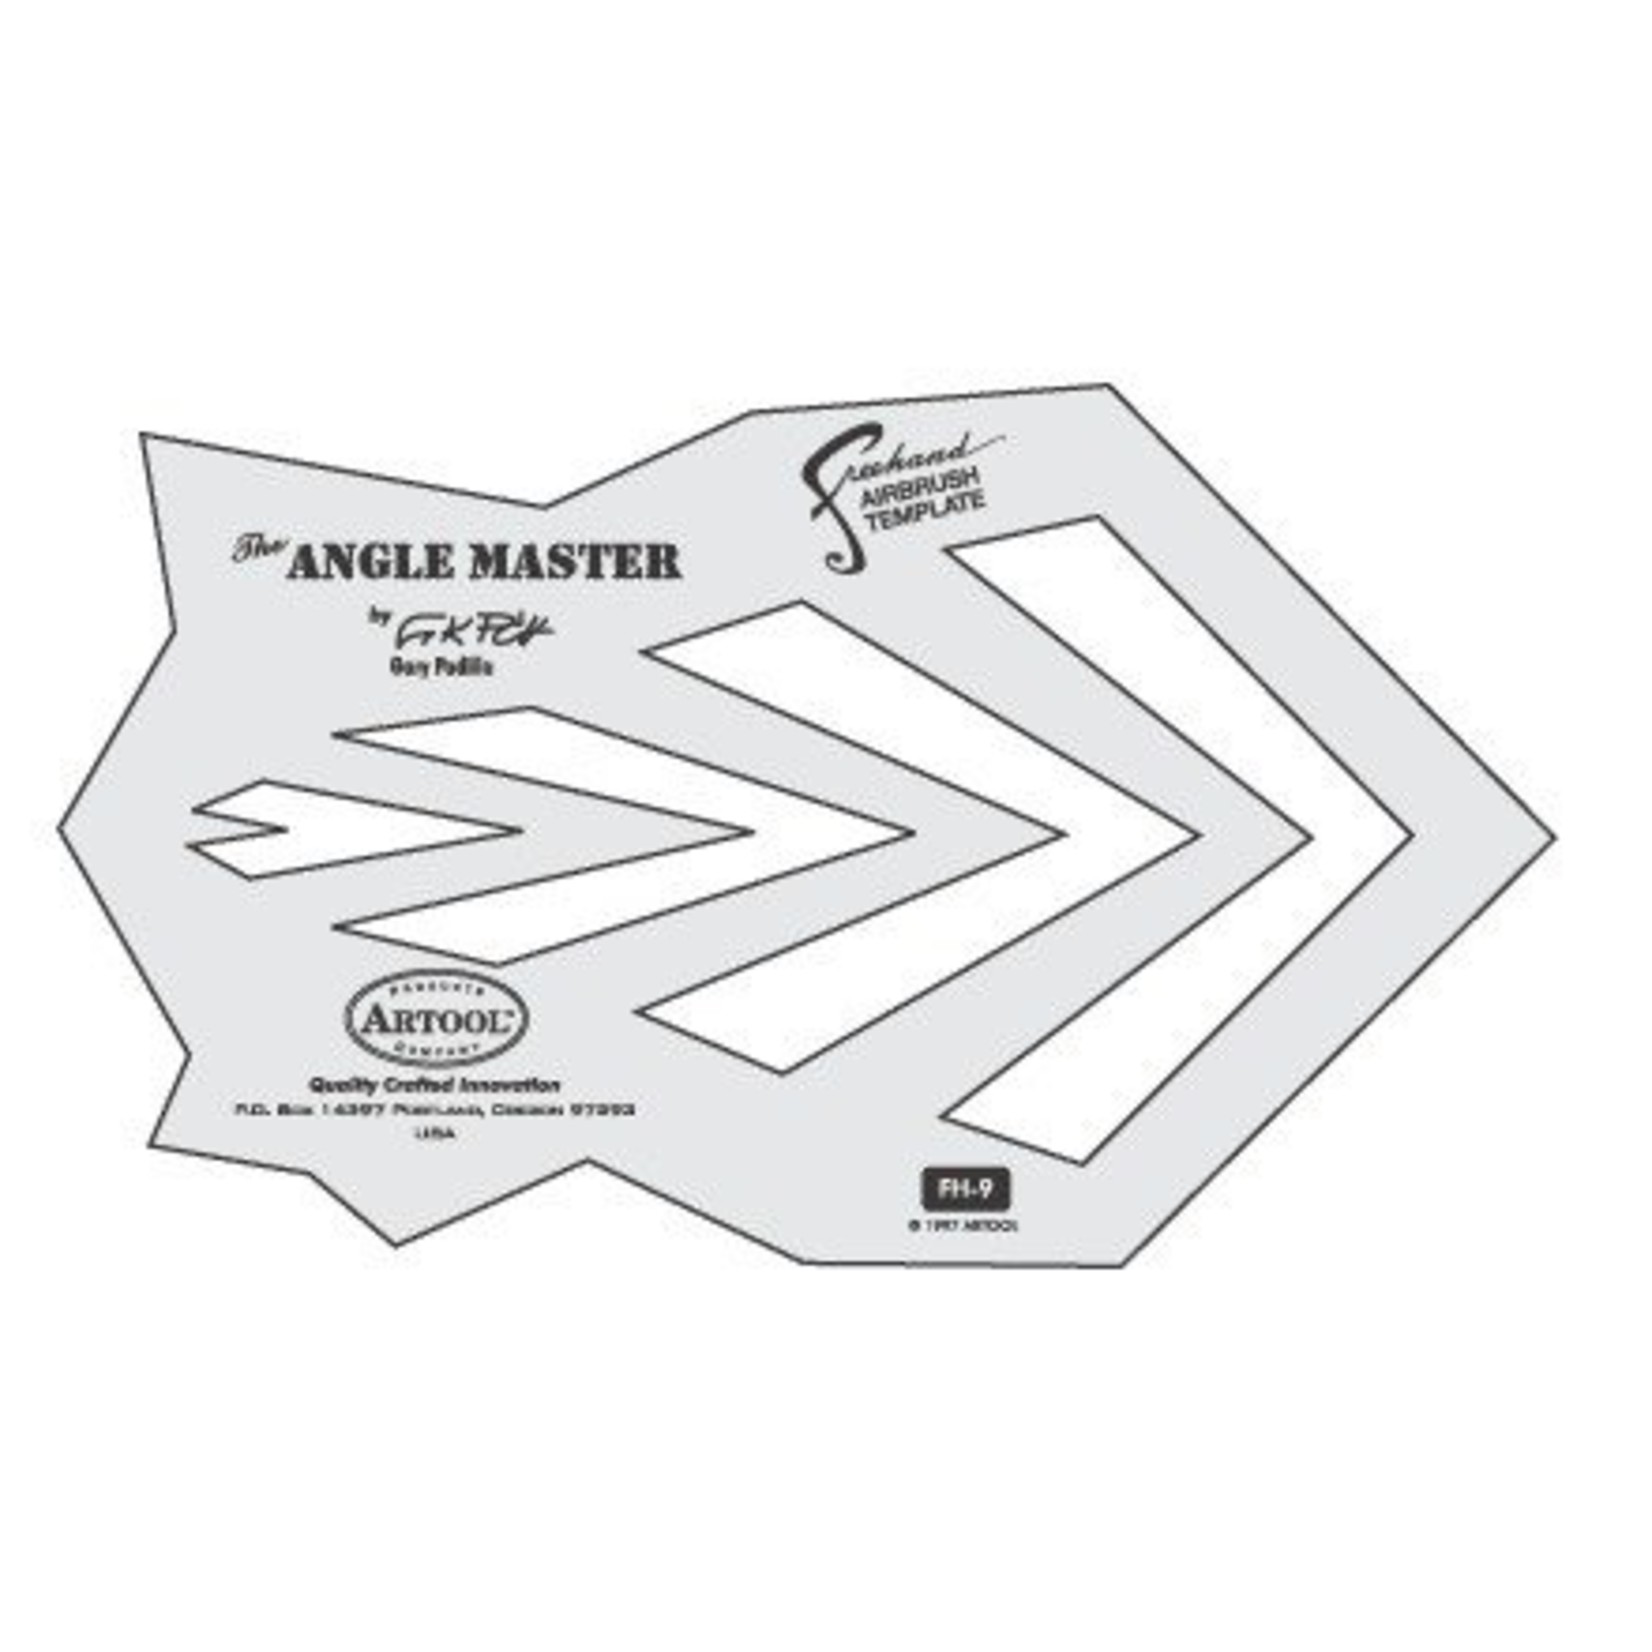 ARTOOLPRODUCTS ARTOOL FREEHAND AIRBRUSH TEMPLATE FH9 THE ANGLE MASTER